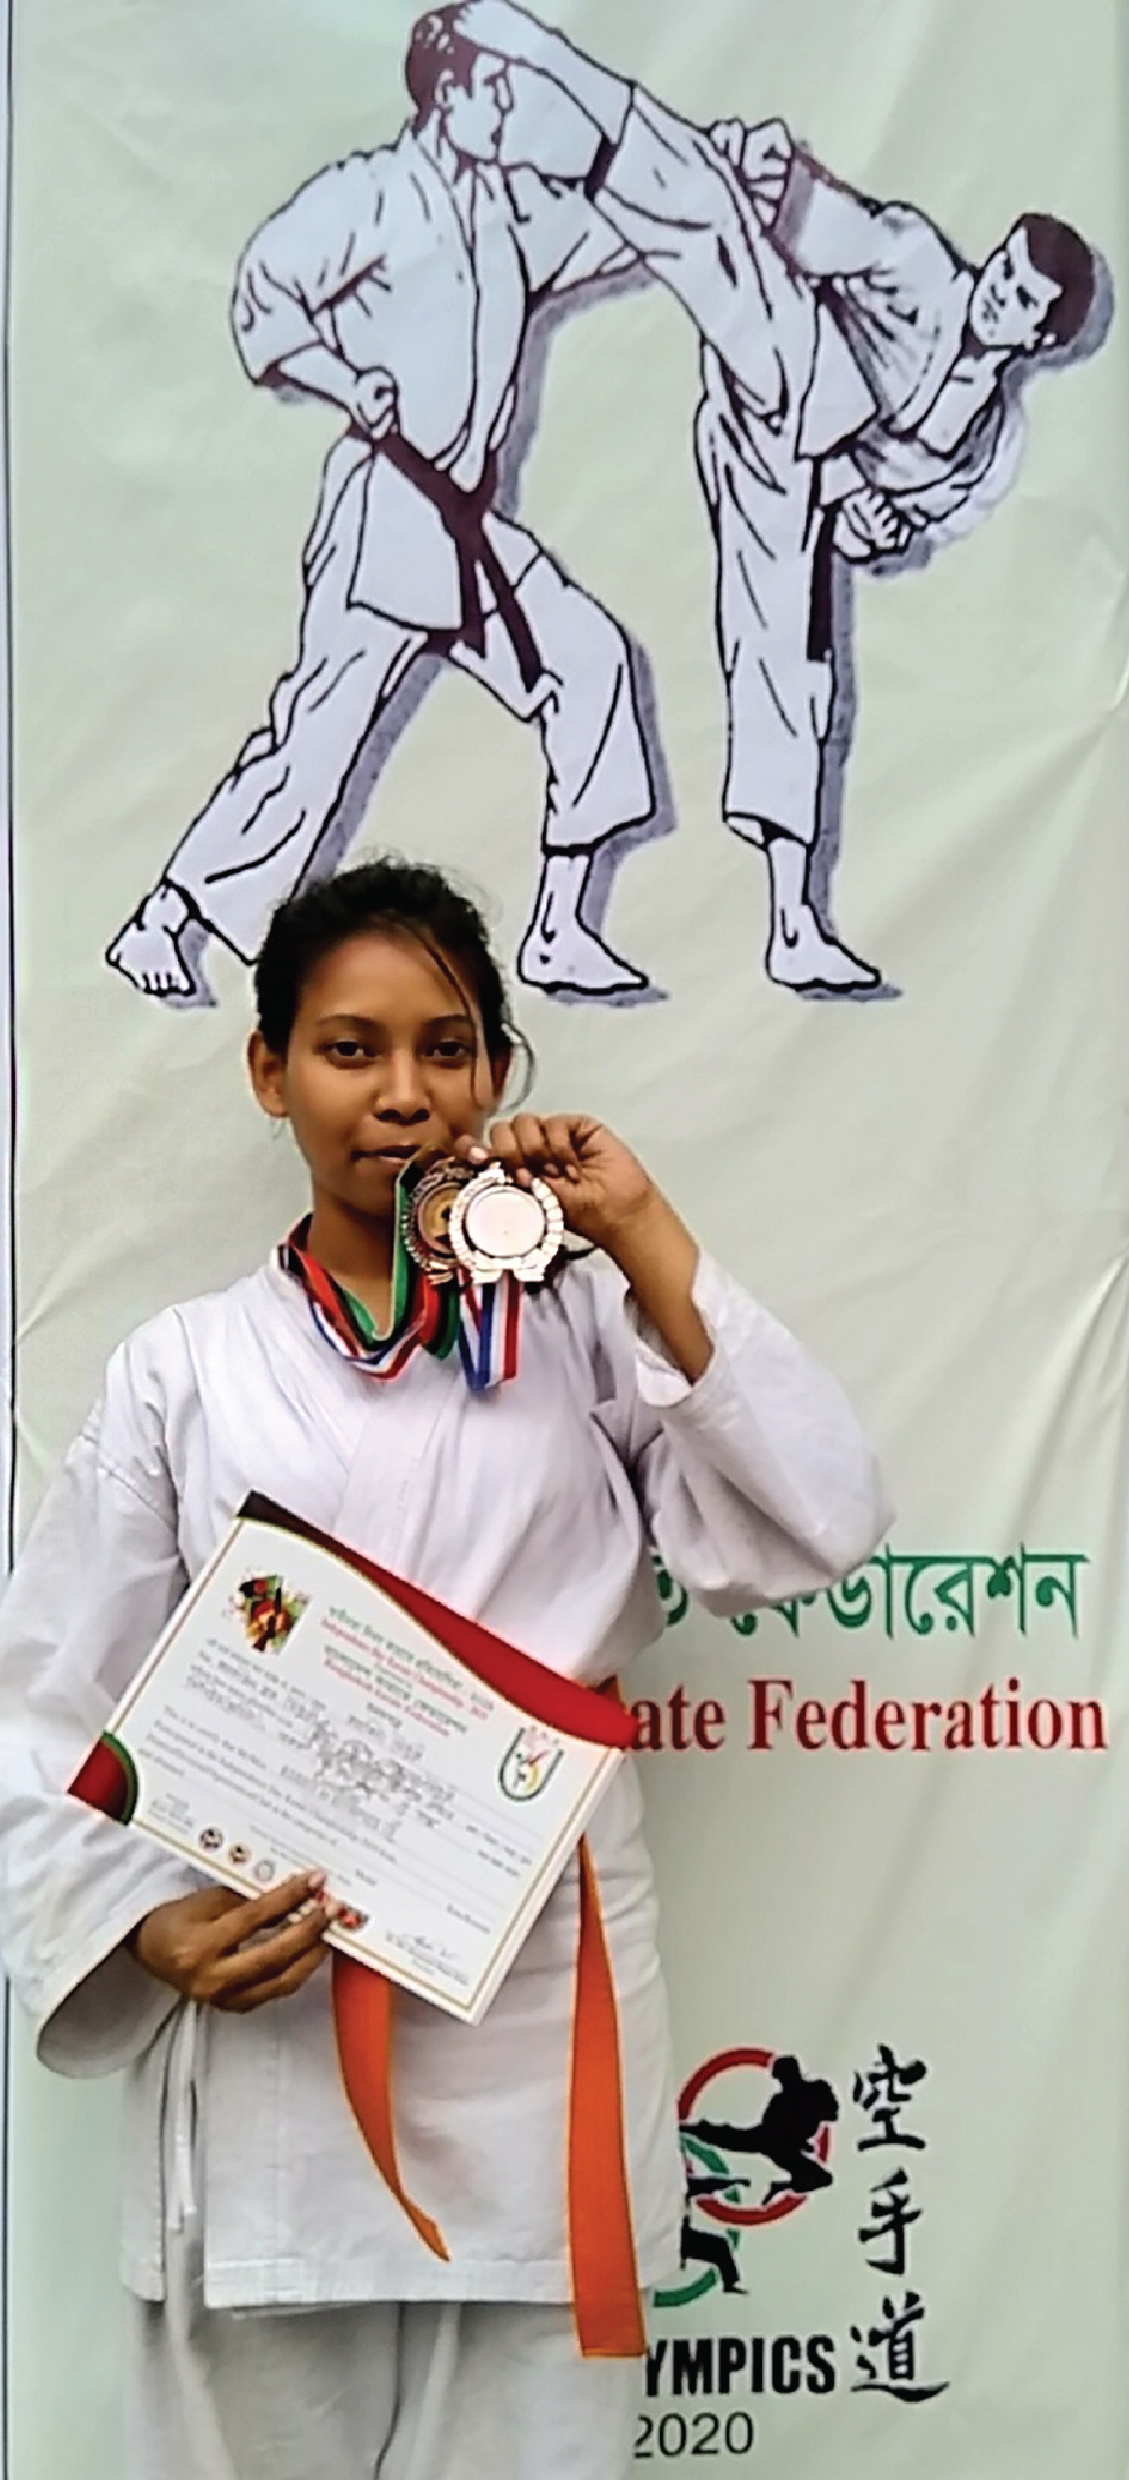 Student of Department of Architecture won silver medal at  2nd International Goju Ryu Karate Championship 2019